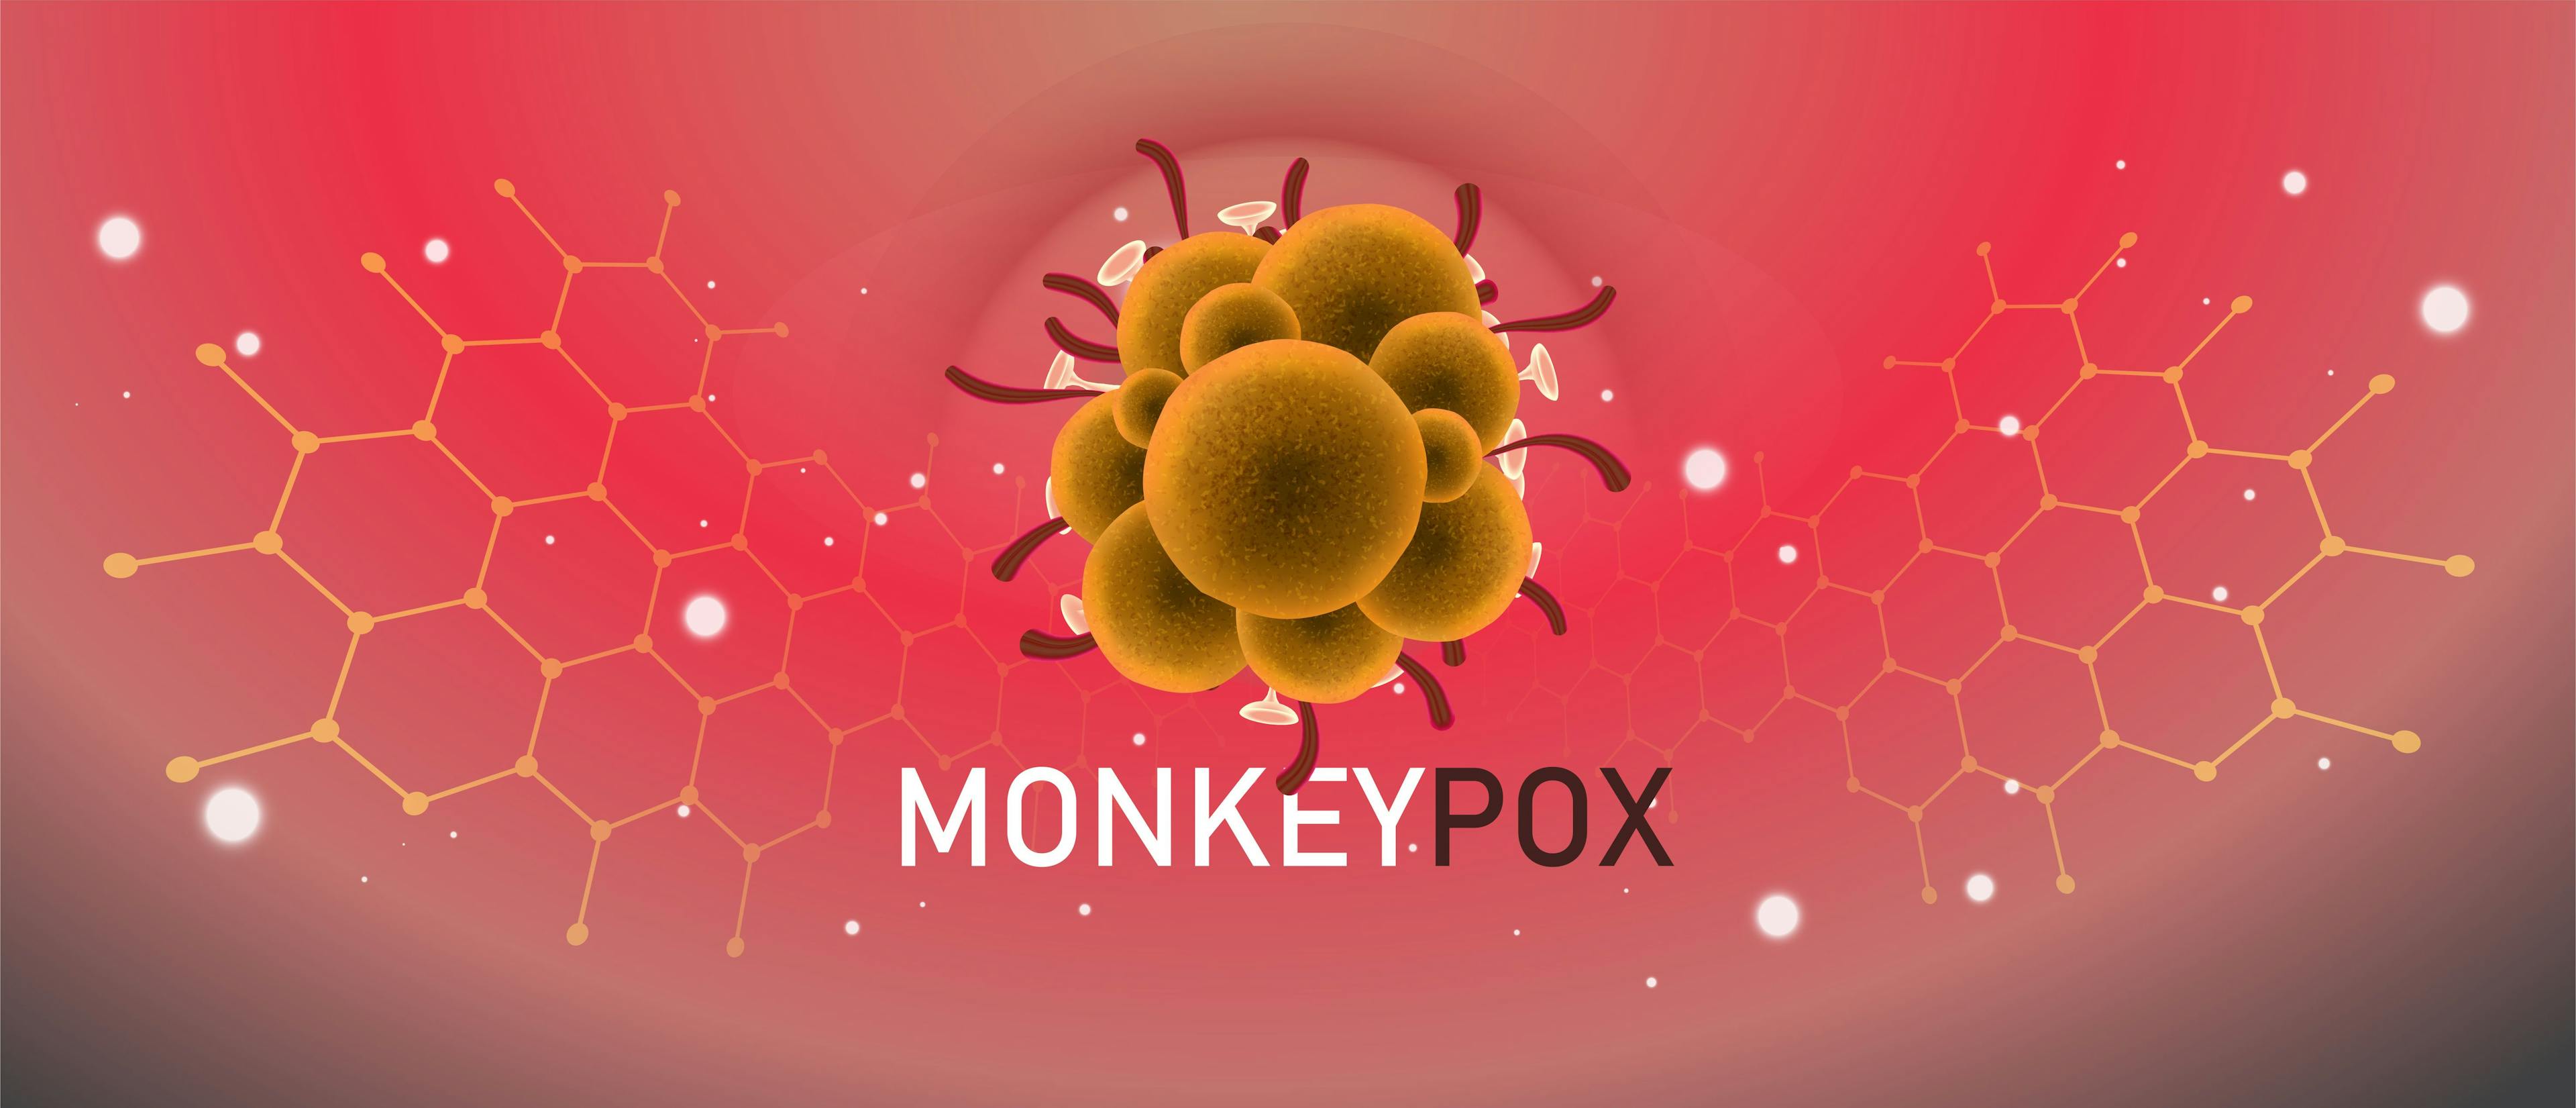 Everything We Know About the Monkeypox Outbreak